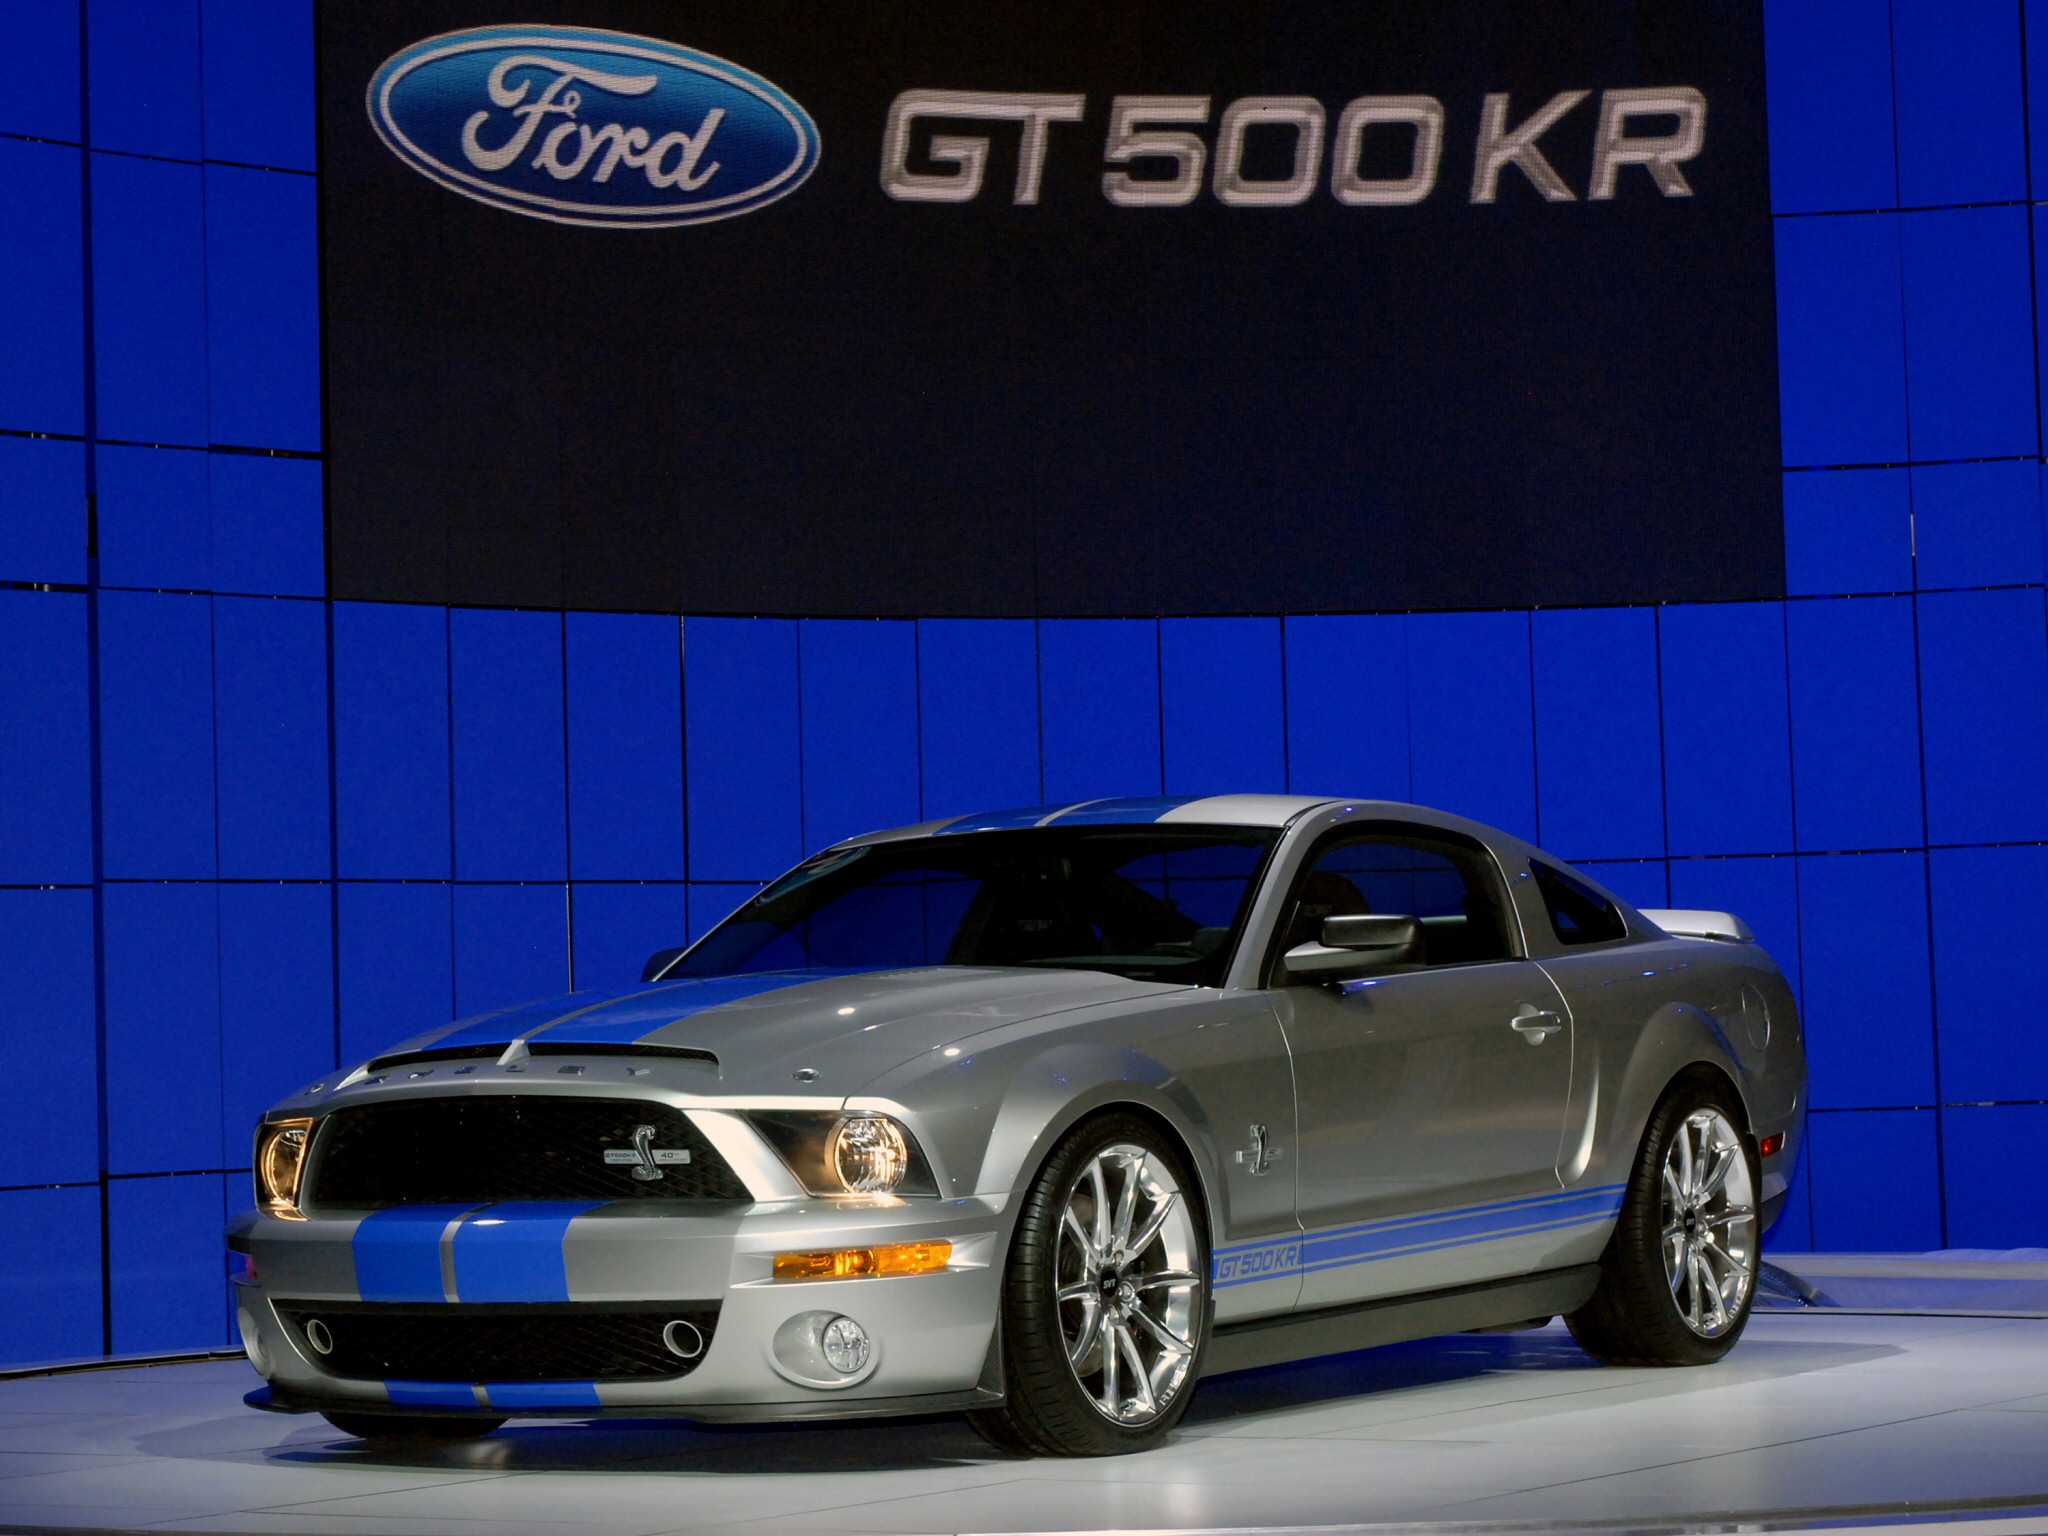 2007, Ford, Mustang, Gt500kr, Supercar, Supercars, Muscle Wallpaper